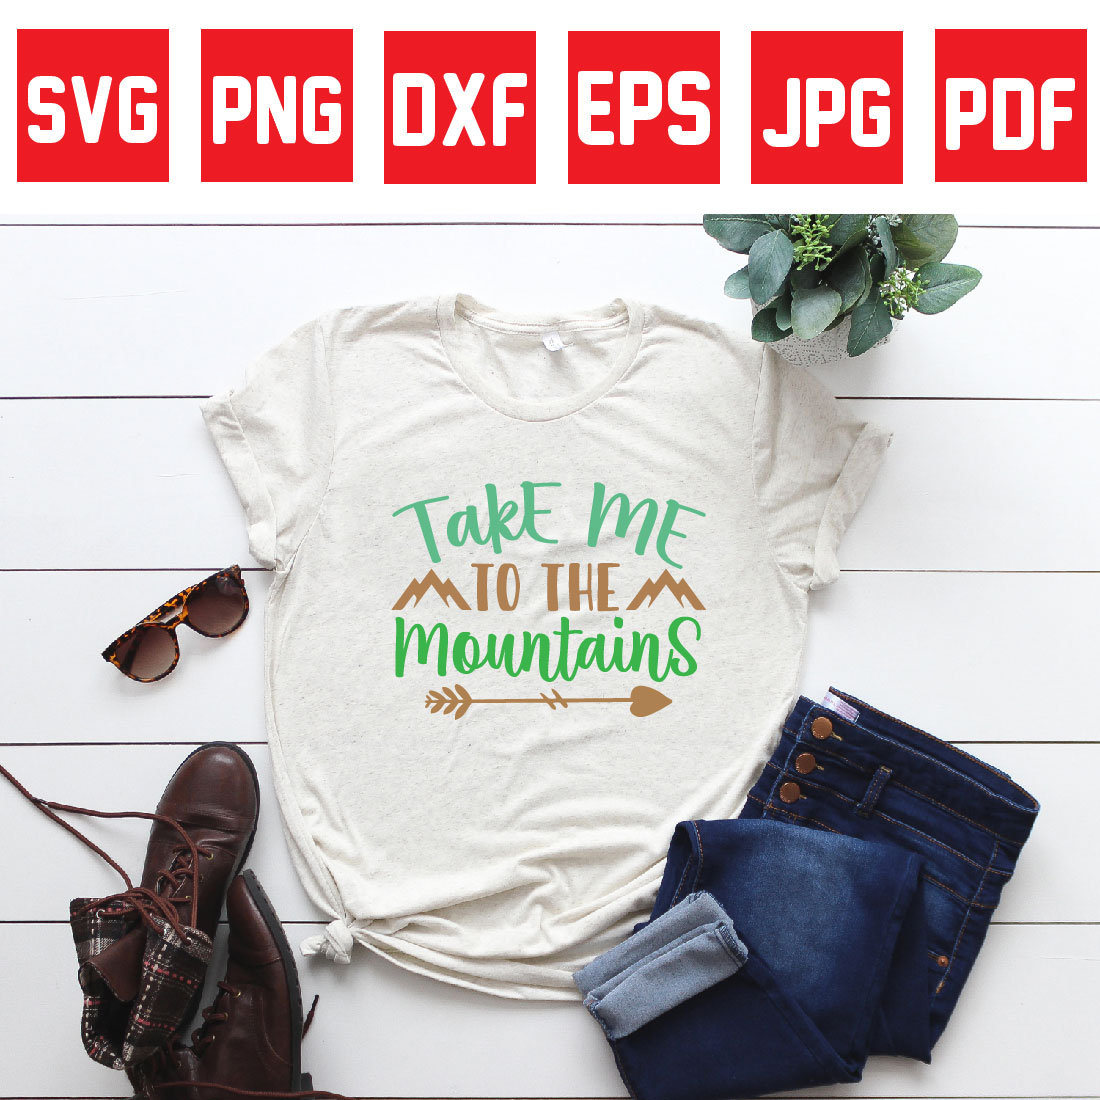 take me to the mountains preview image.